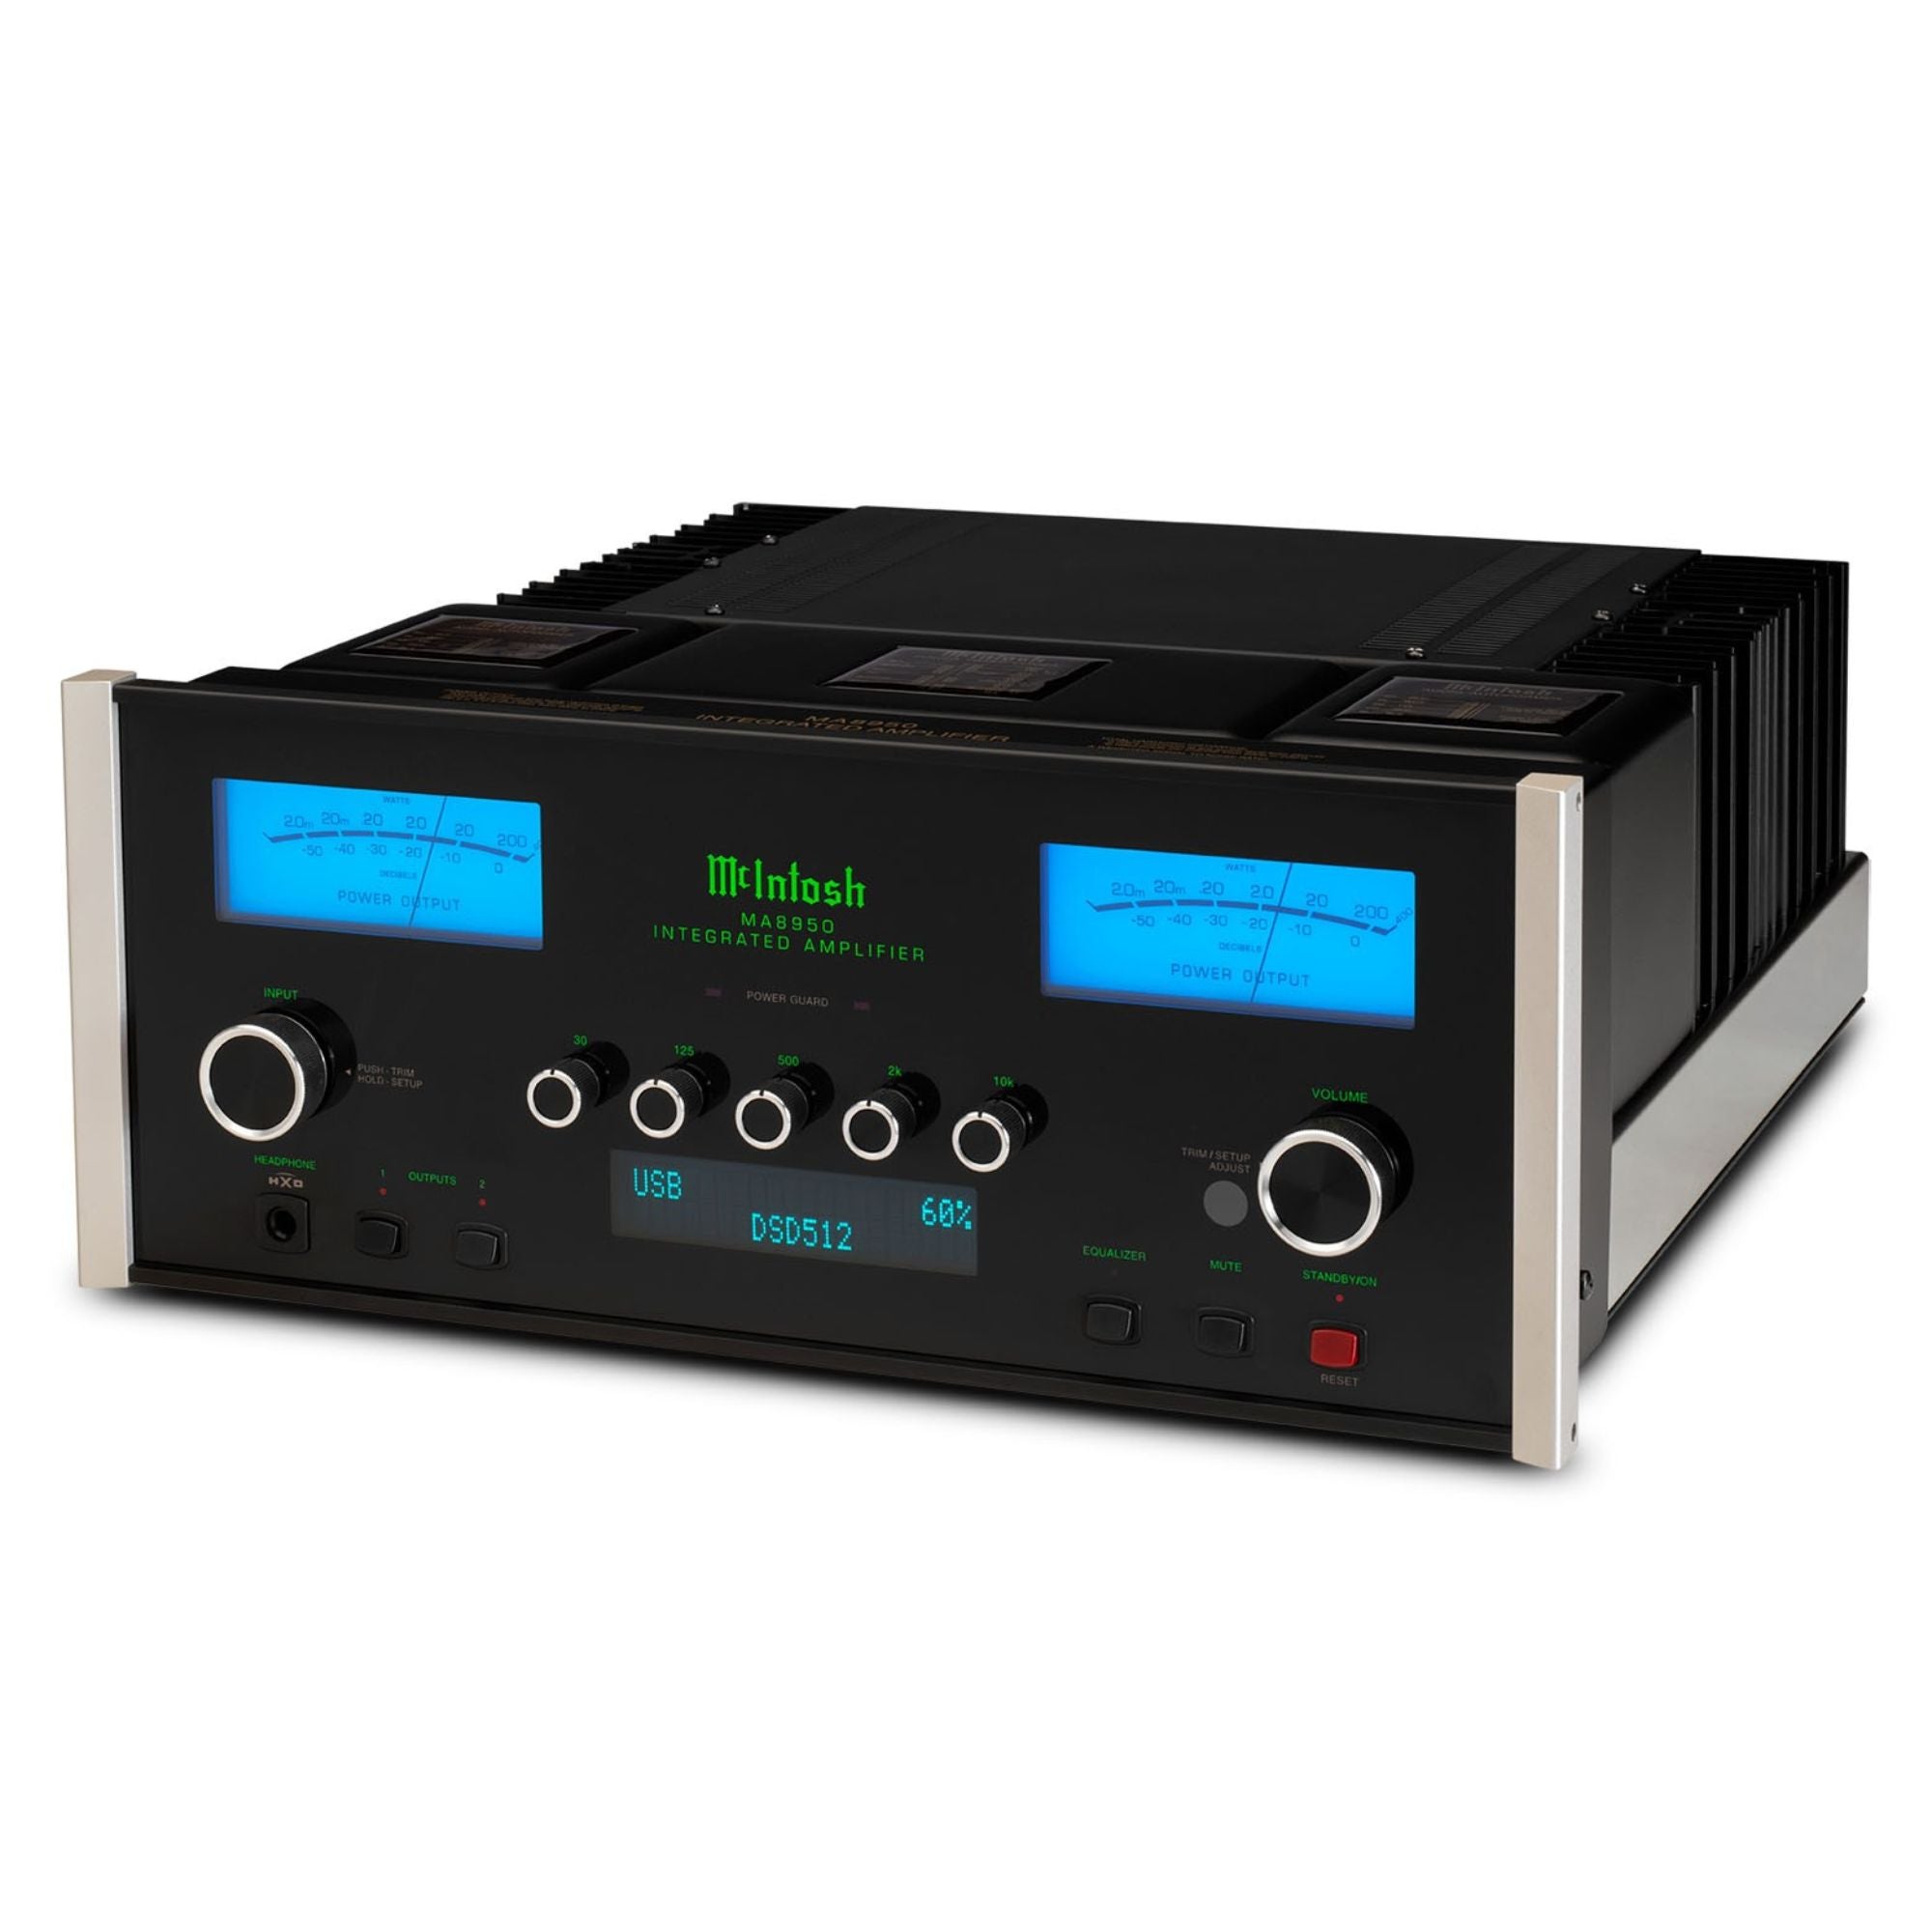 McIntosh Labs MA8950 - 2 Channel Integrated Amplifier - AVStore